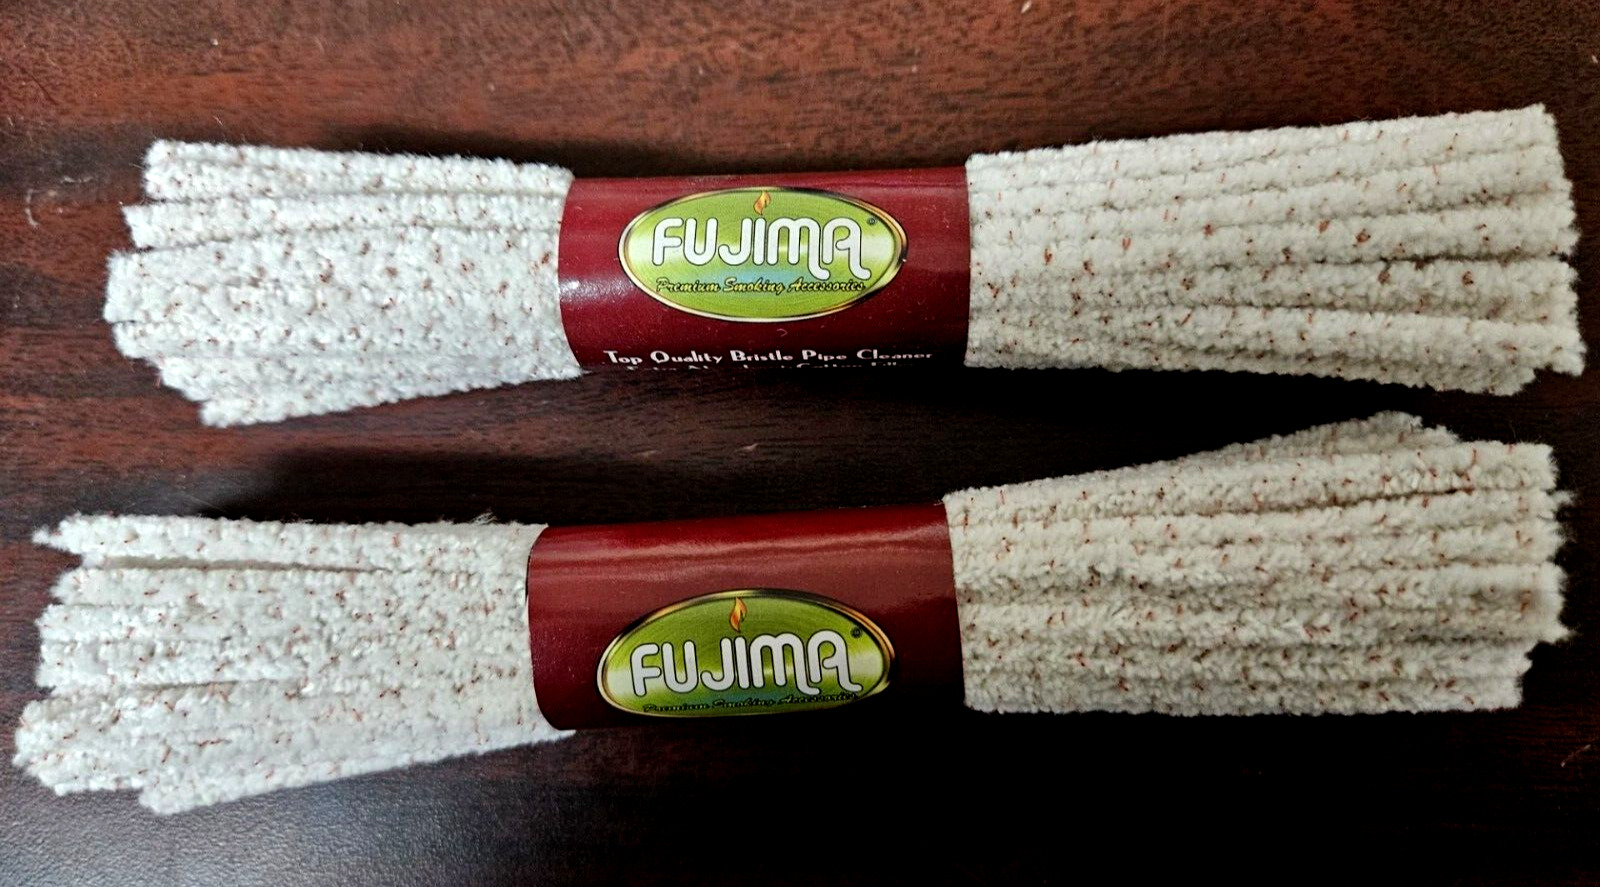 2x44  ct. Fujima Top Quality Bristle  Pipe Cleaner Extra Absorbent Cotton Filler